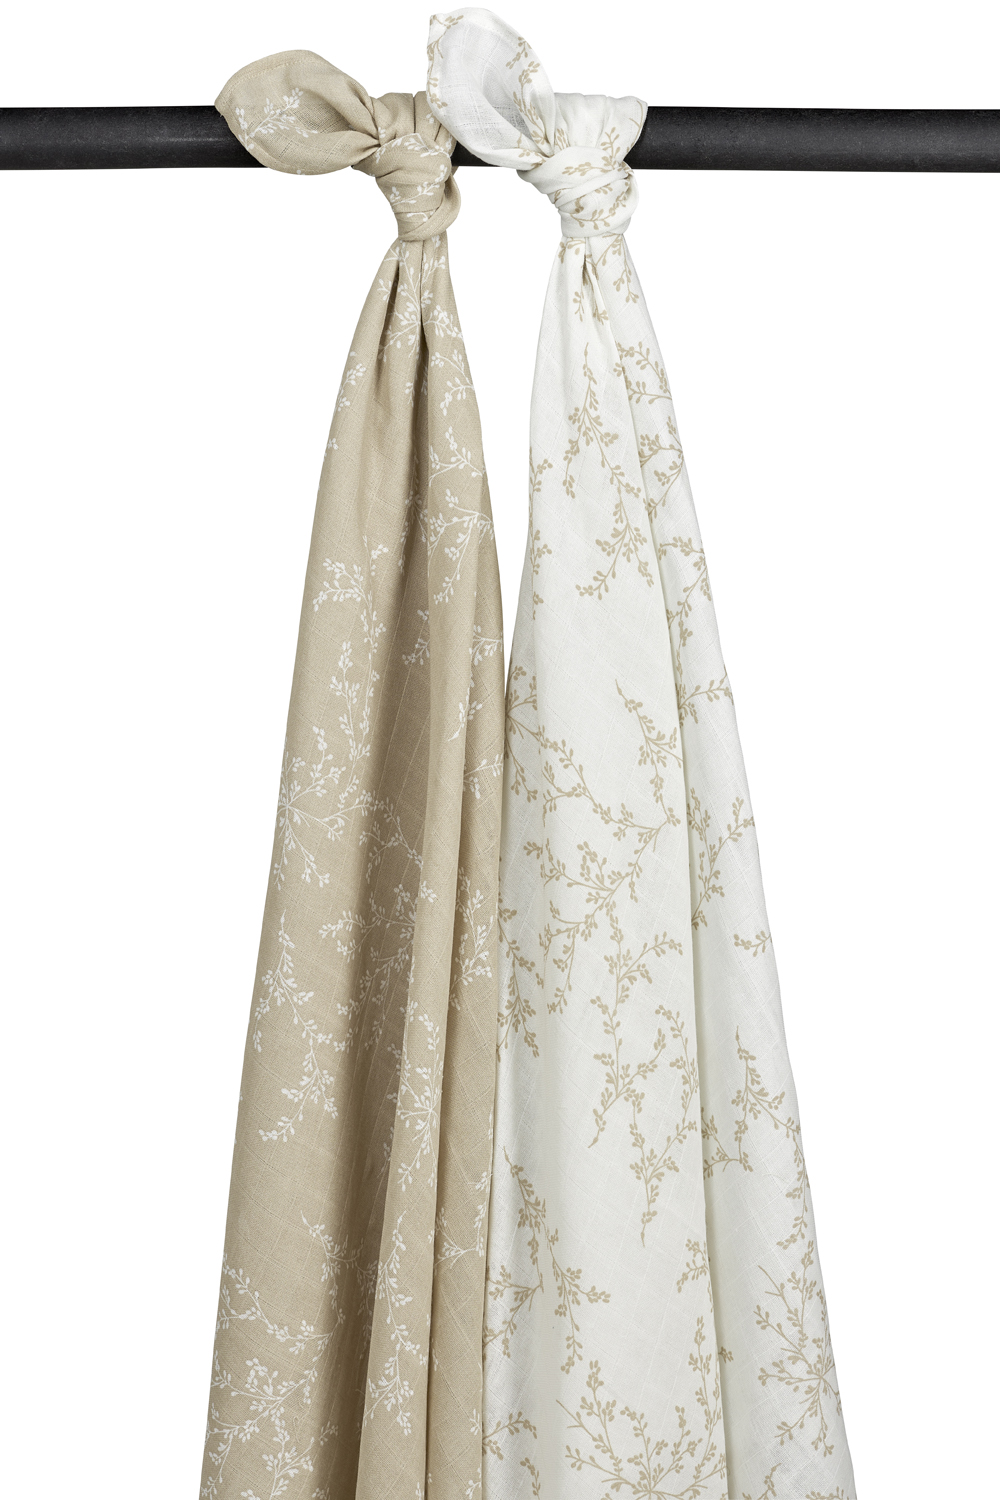 Swaddle 2-pack muslin Branches - sand - 120x120cm